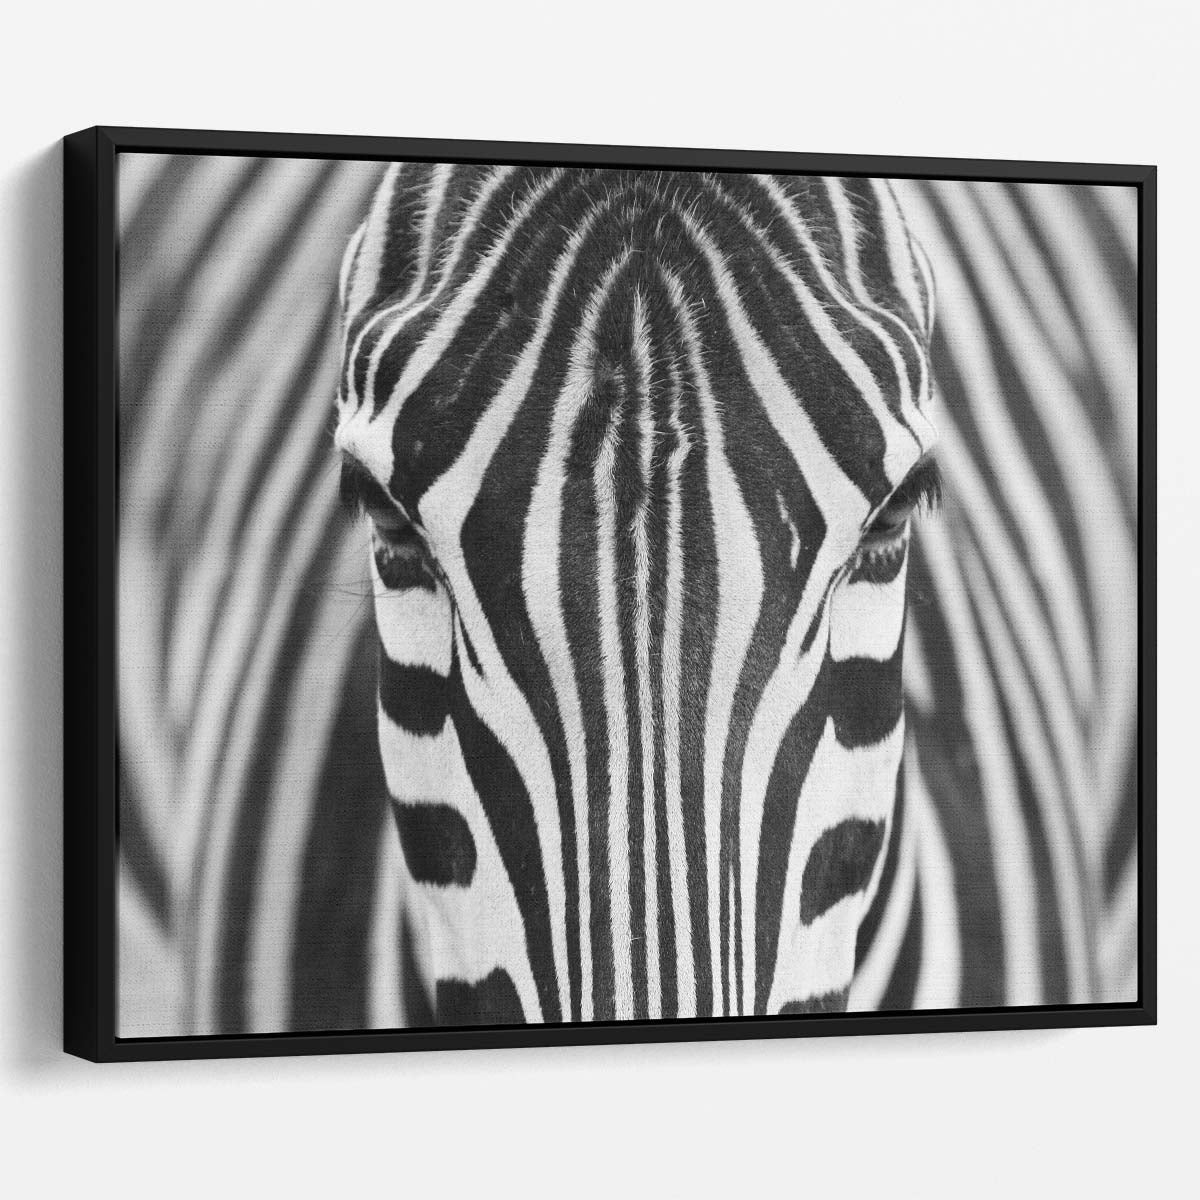 Monochrome Zebra Stripes Abstract Wildlife Wall Art by Luxuriance Designs. Made in USA.